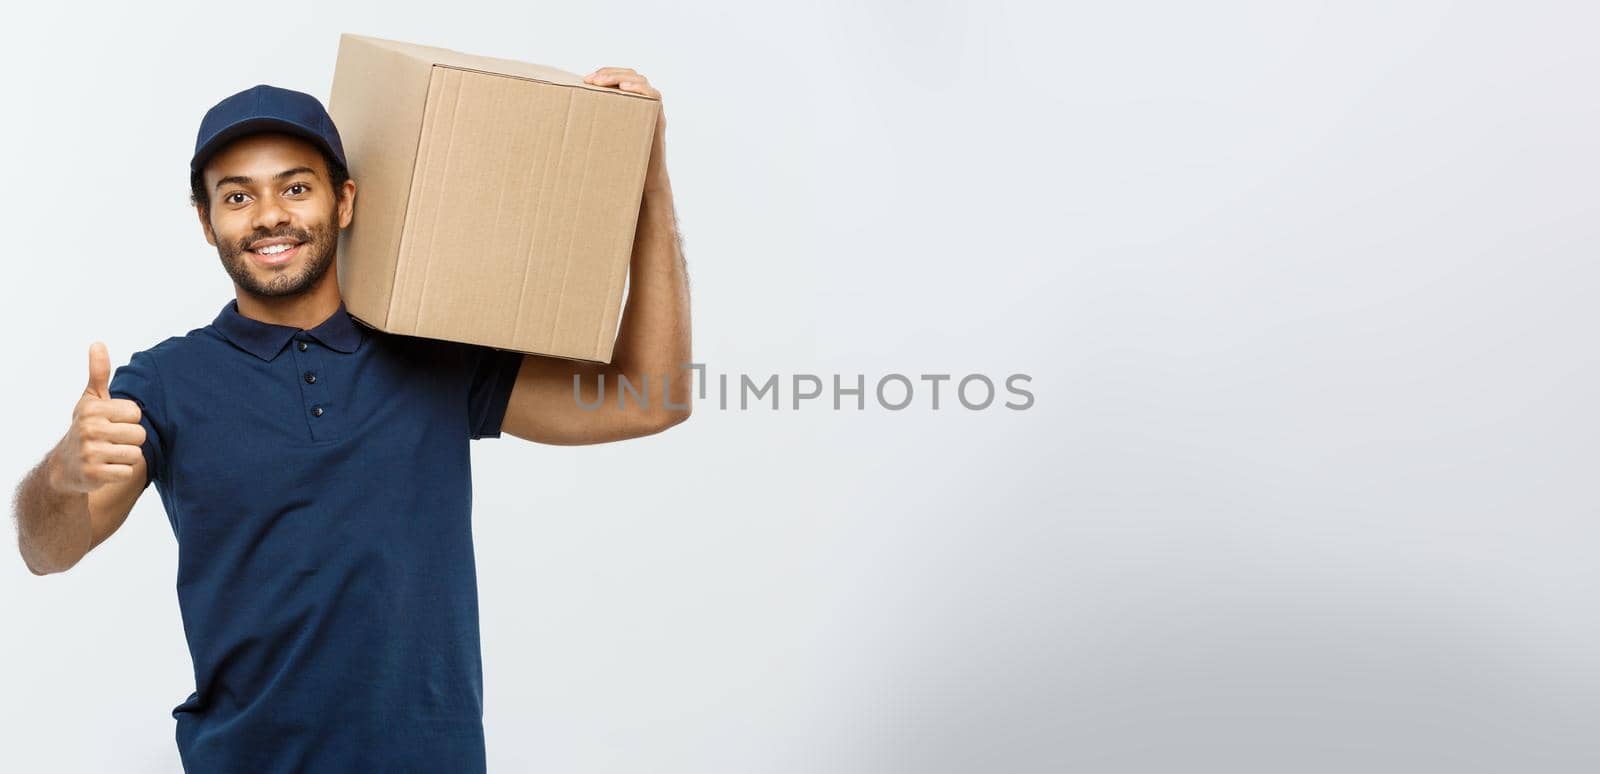 Delivery Concept - Portrait of Happy African American delivery man holding a box package and showing thumps up. Isolated on Grey studio Background. Copy Space